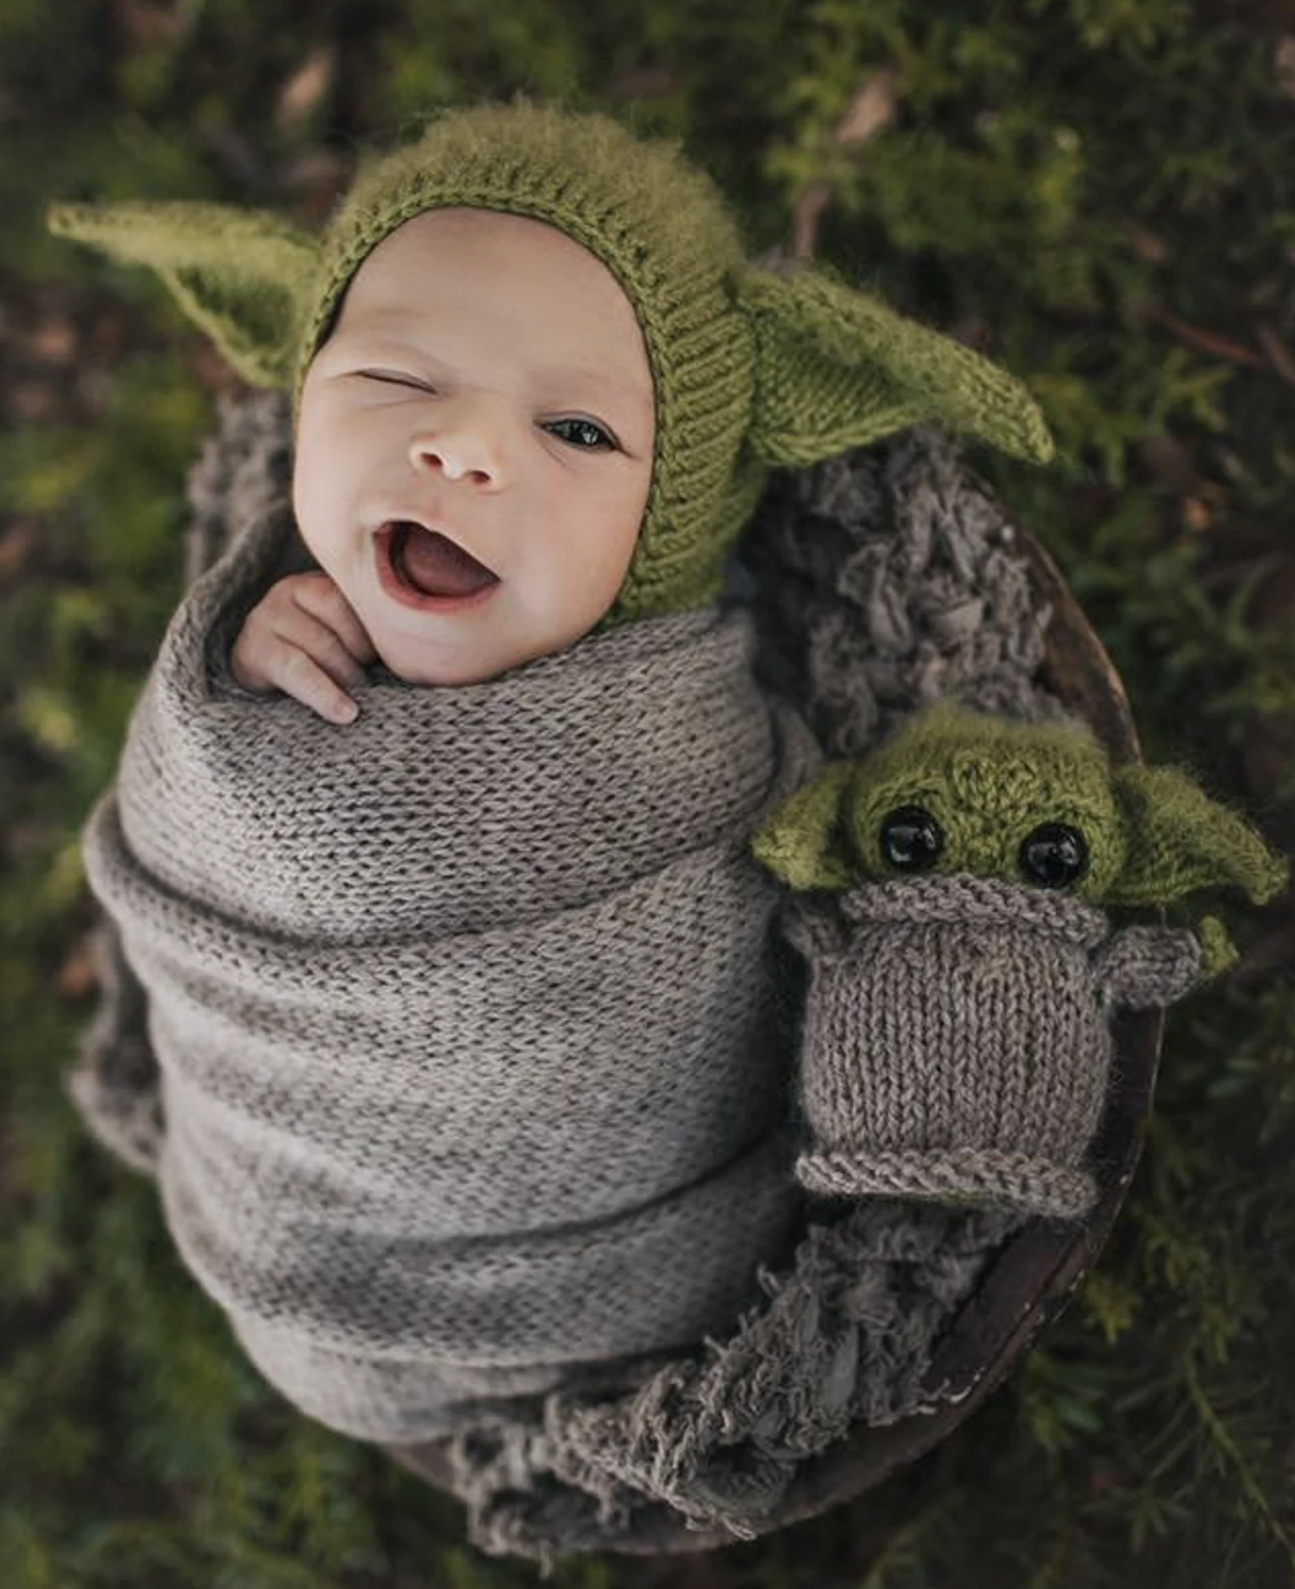 16 of the Most Adorable (And Unique!) Baby Halloween Costumes